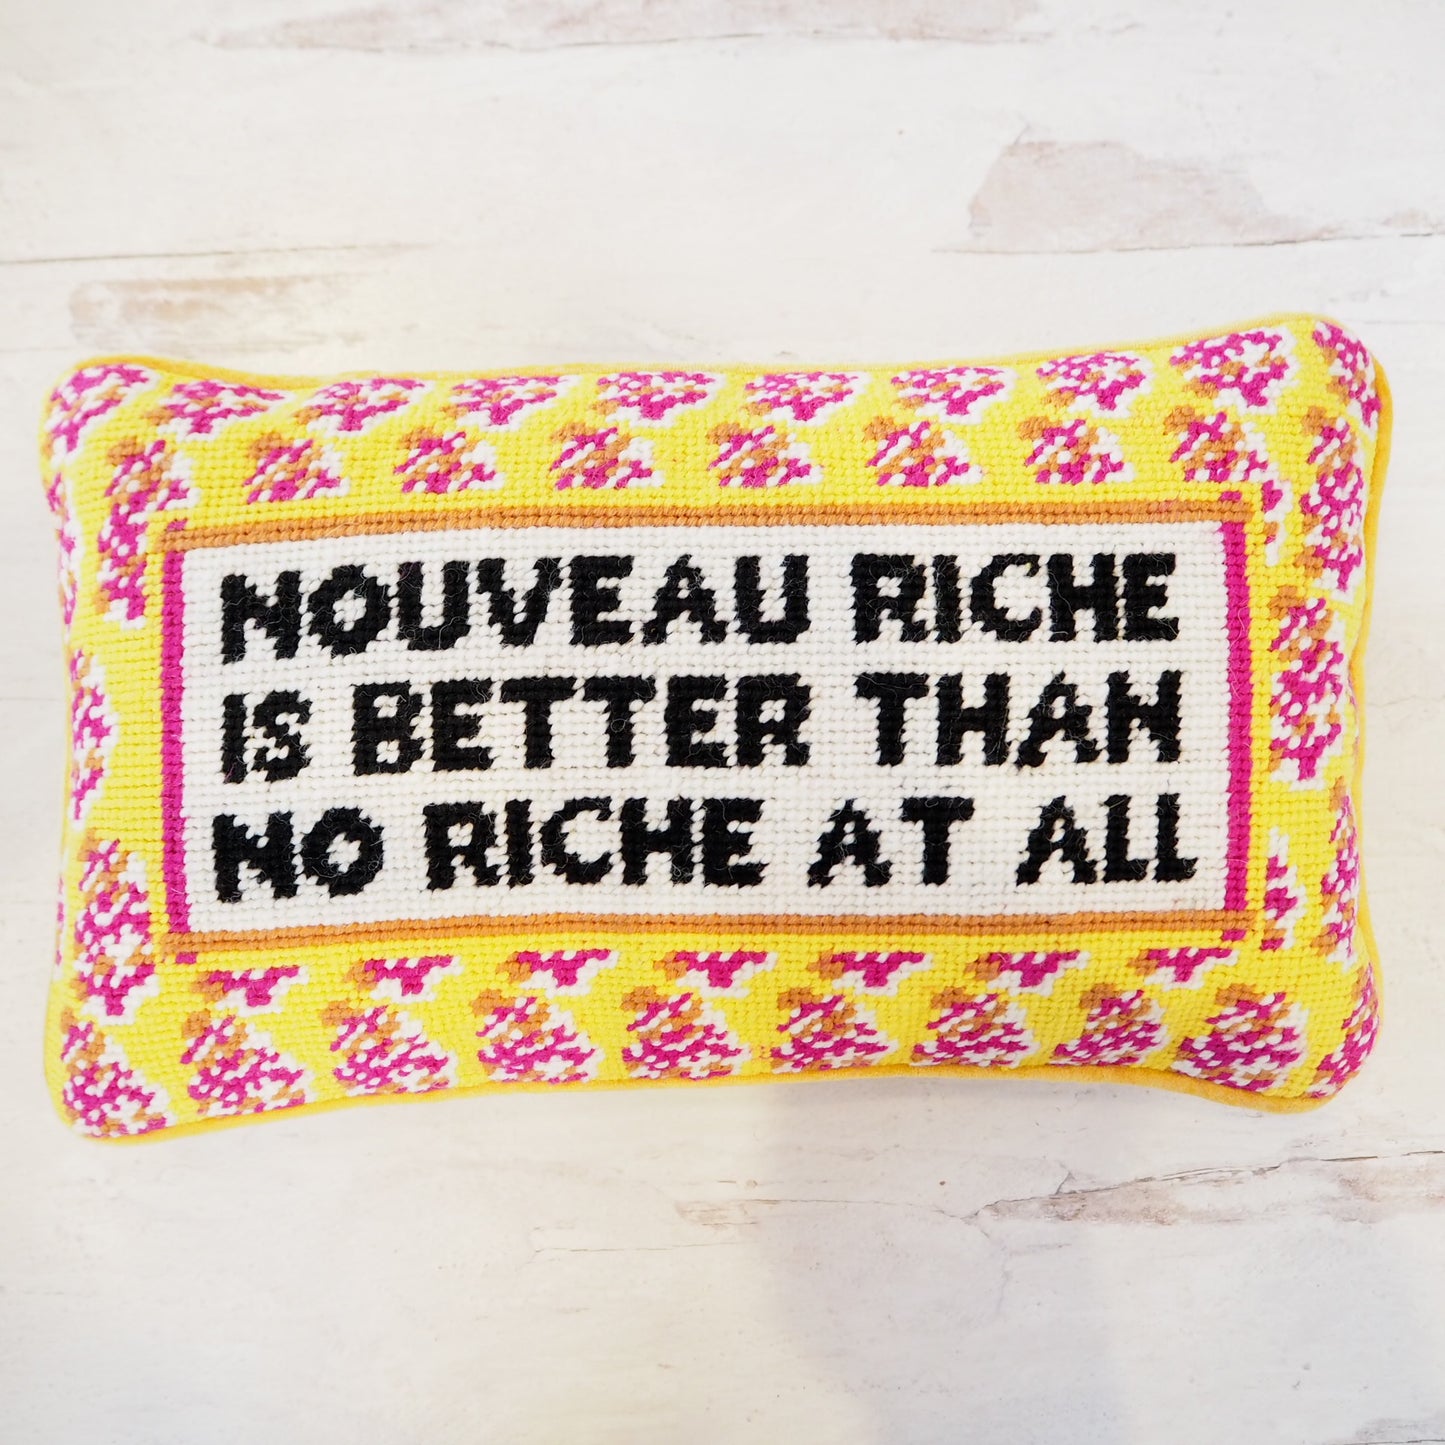 Nouveau Riche is Better Thank No Riche at All Hooked Pillow